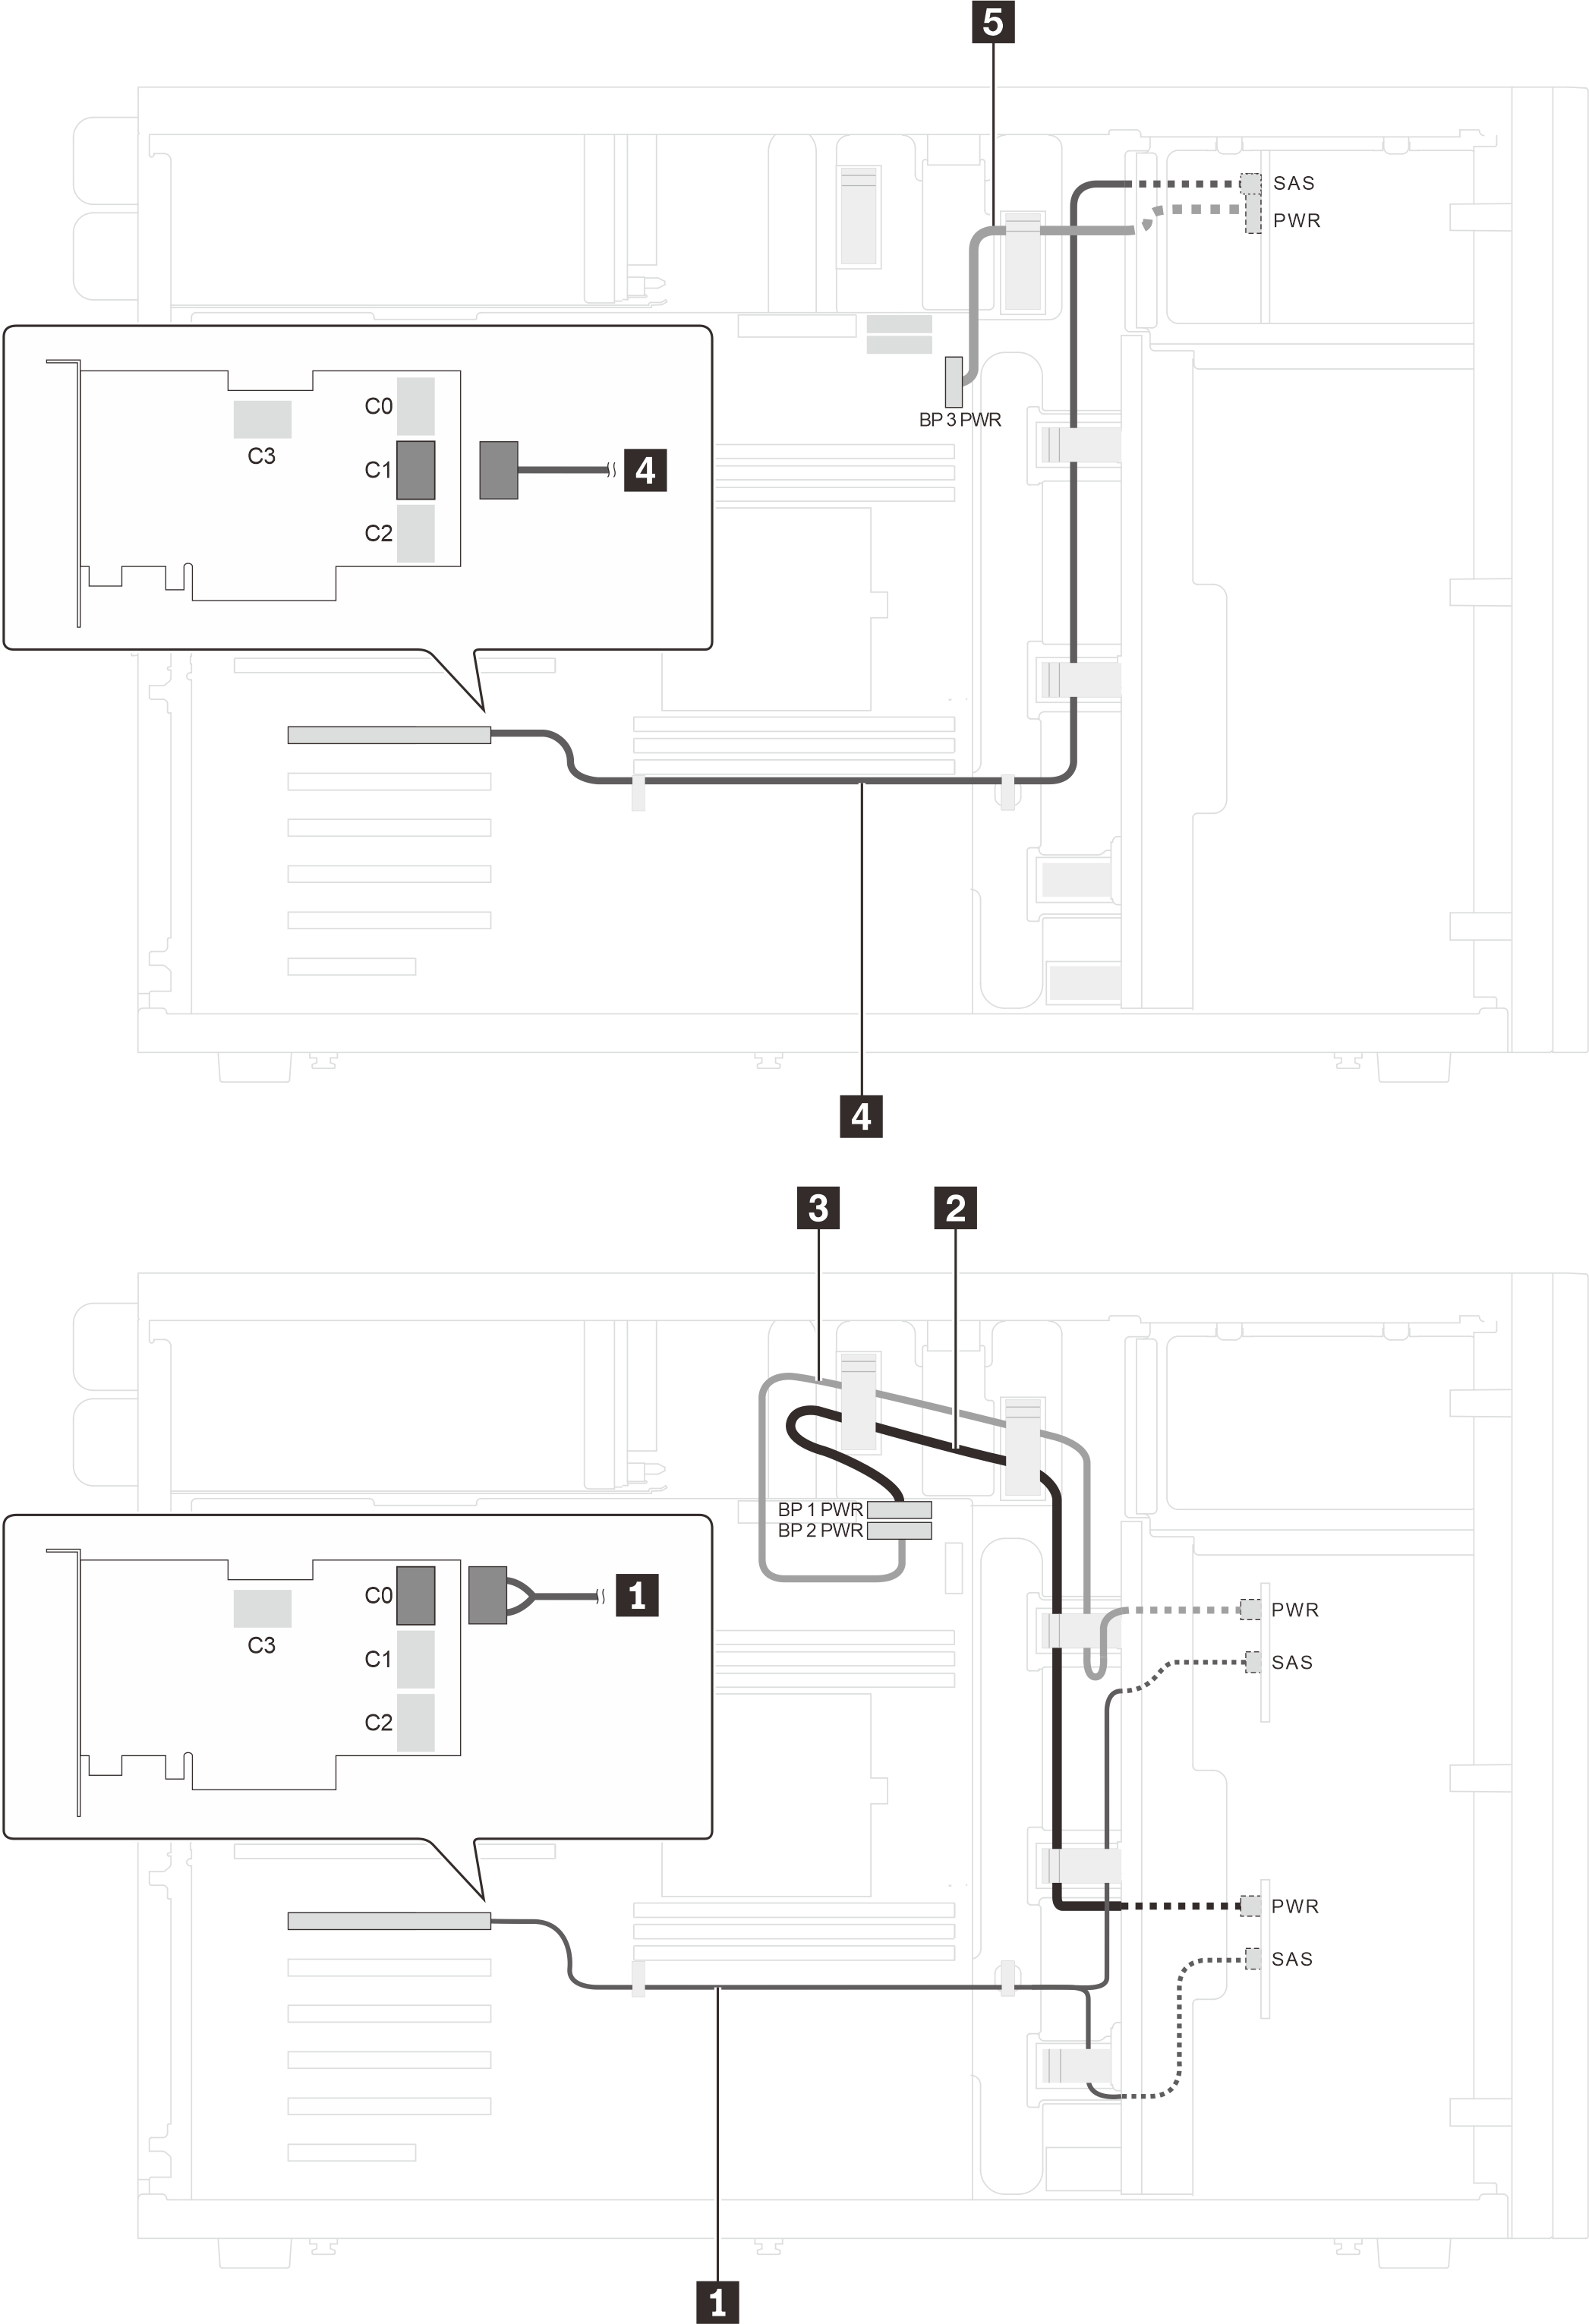 Cable routing for server models with eight 3.5-inch hot-swap SAS/SATA drives, four 2.5-inch hot-swap SAS/SATA drives, and one 32i RAID adapter